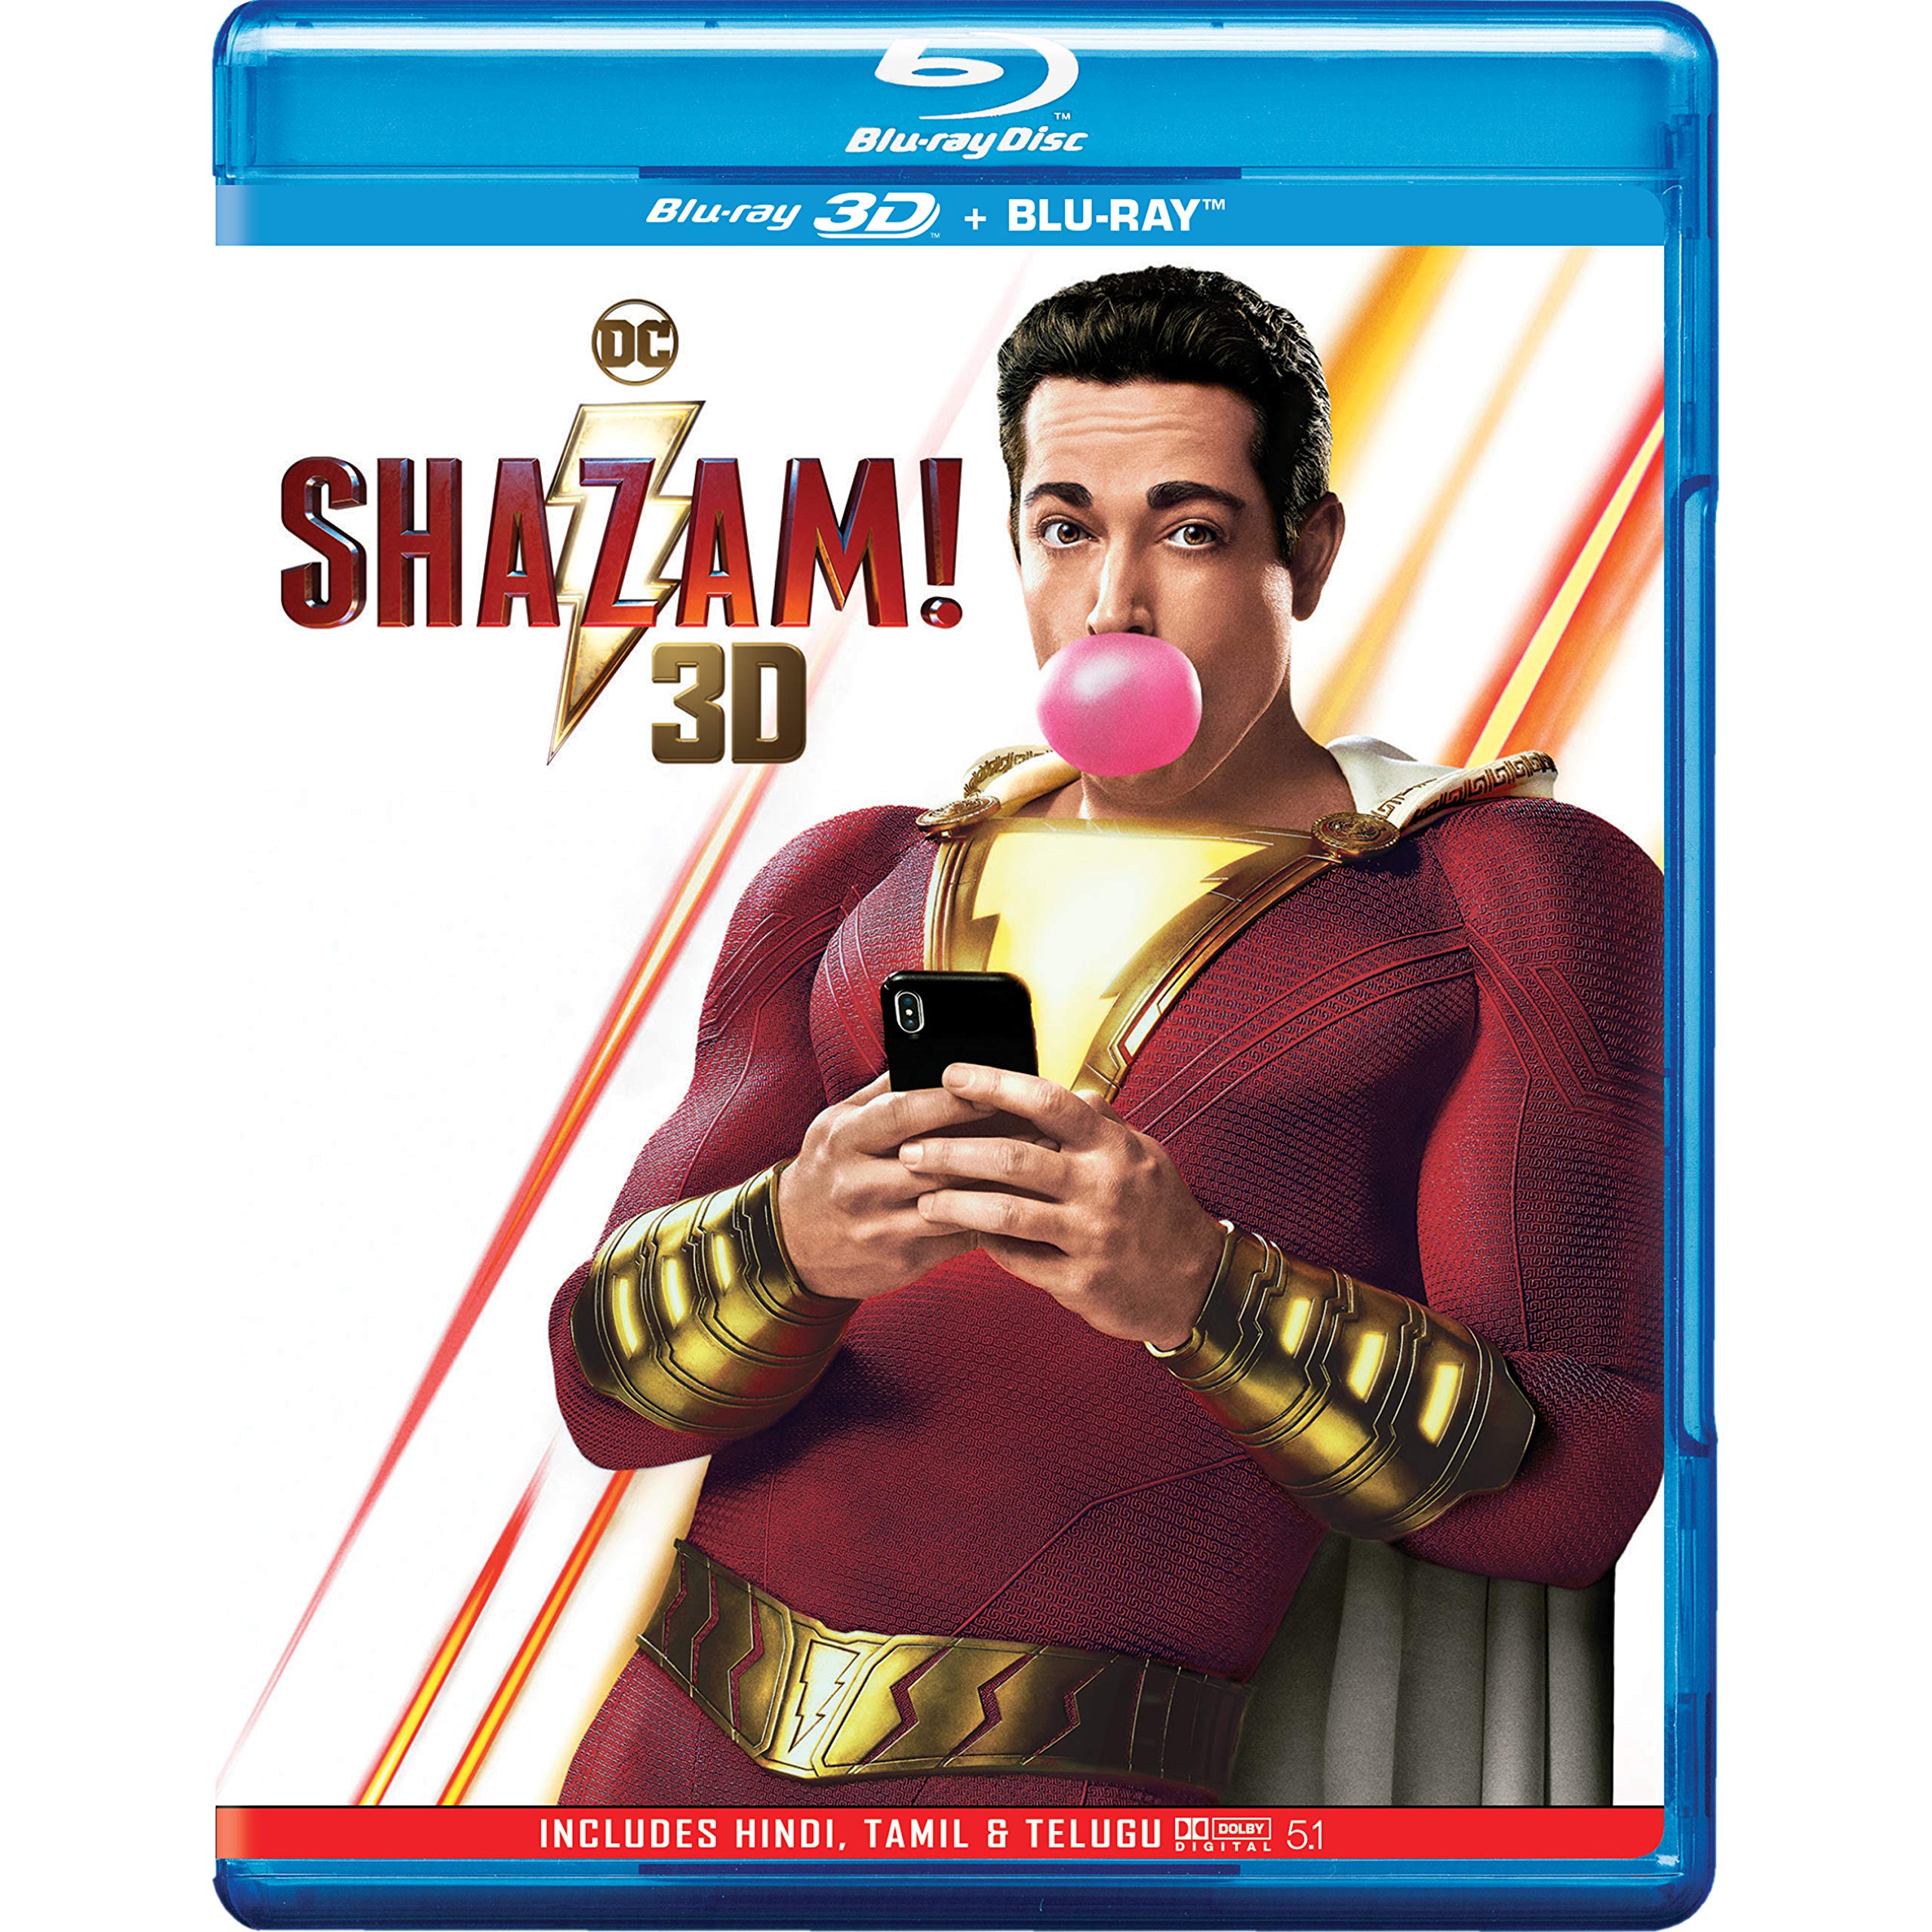 shazam-blu-ray-3d-blu-ray-2-disc-movie-purchase-or-watch-online